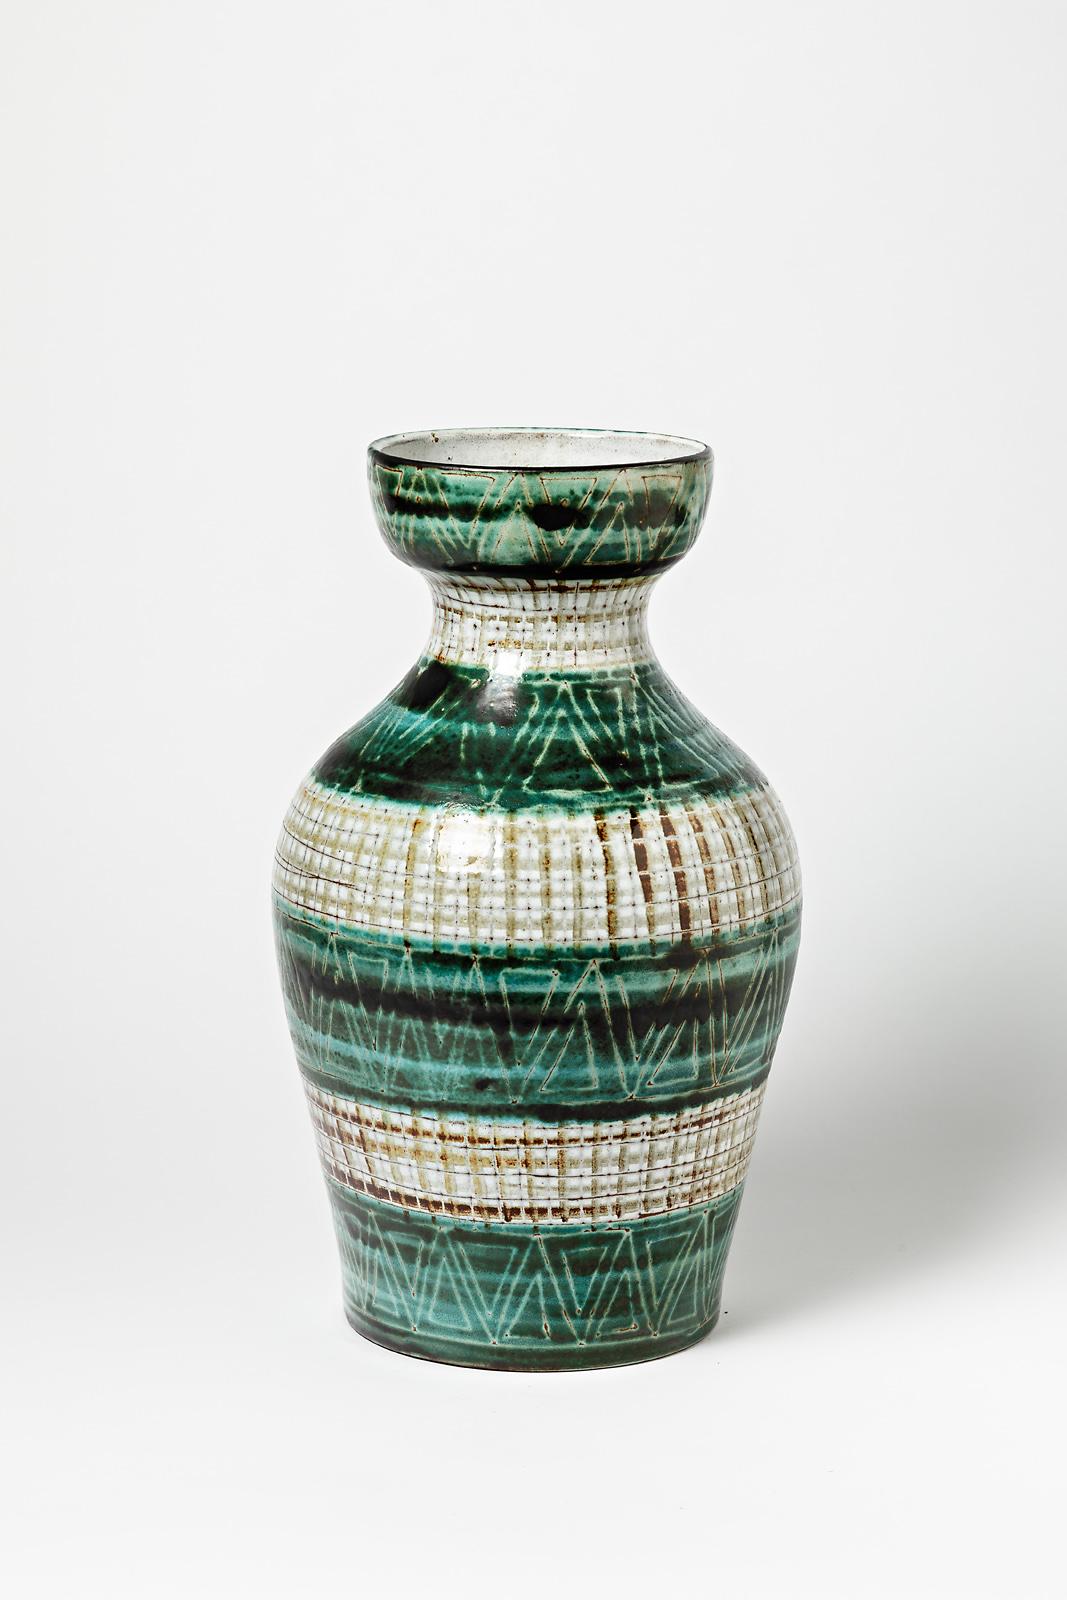 Robert Picault 

Large and decorative ceramic vase by the French artist.

Realised in Vallauris, circa 1950

Mid-20th century decorative pottery vase with white and green ceramic colors glazes and geometric decor

Signed under the